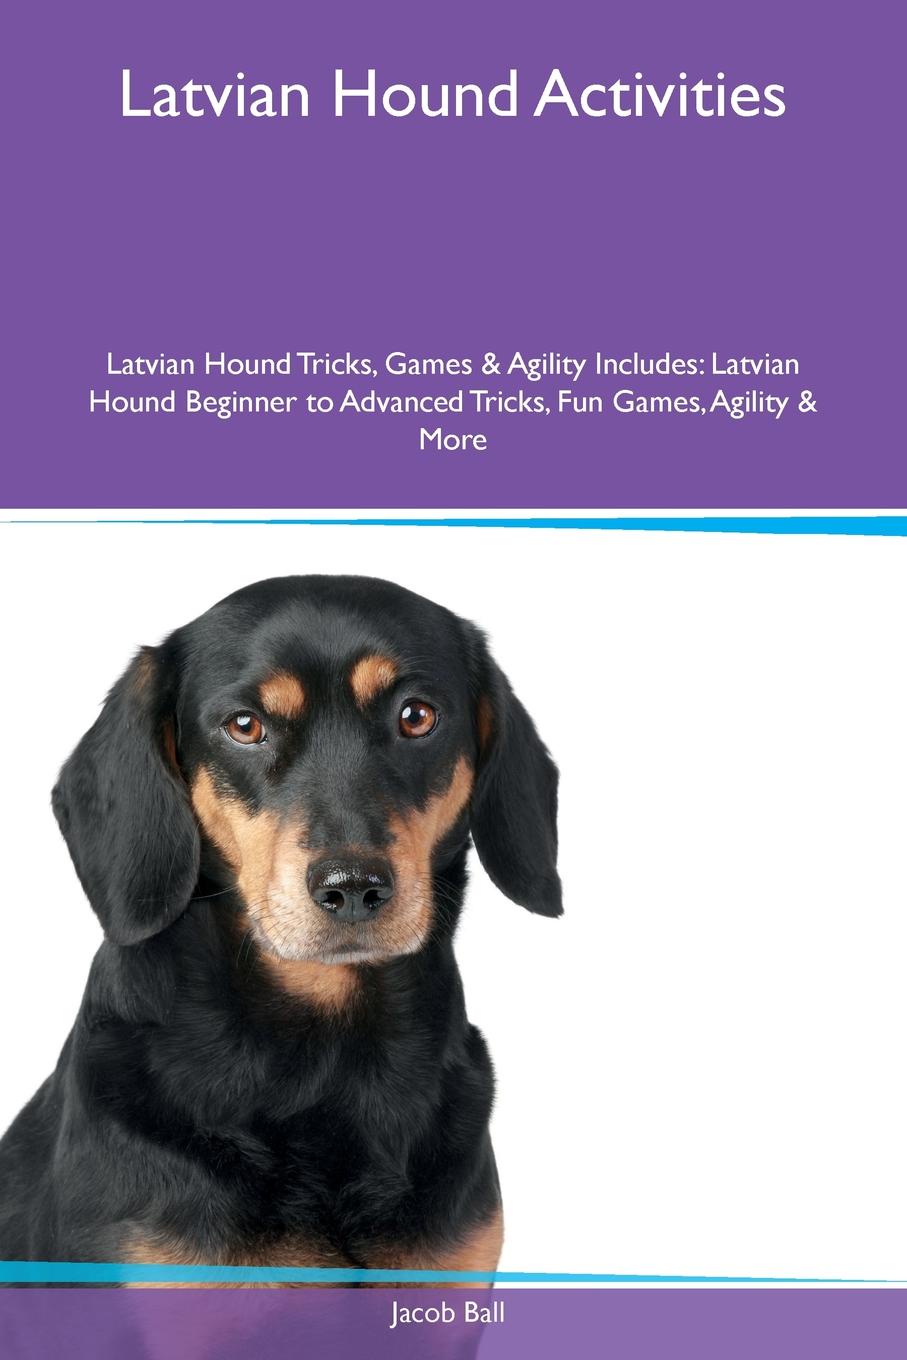 Latvian Hound Activities Latvian Hound Tricks, Games & Agility Includes. Latvian Hound Beginner to Advanced Tricks, Fun Games, Agility & More